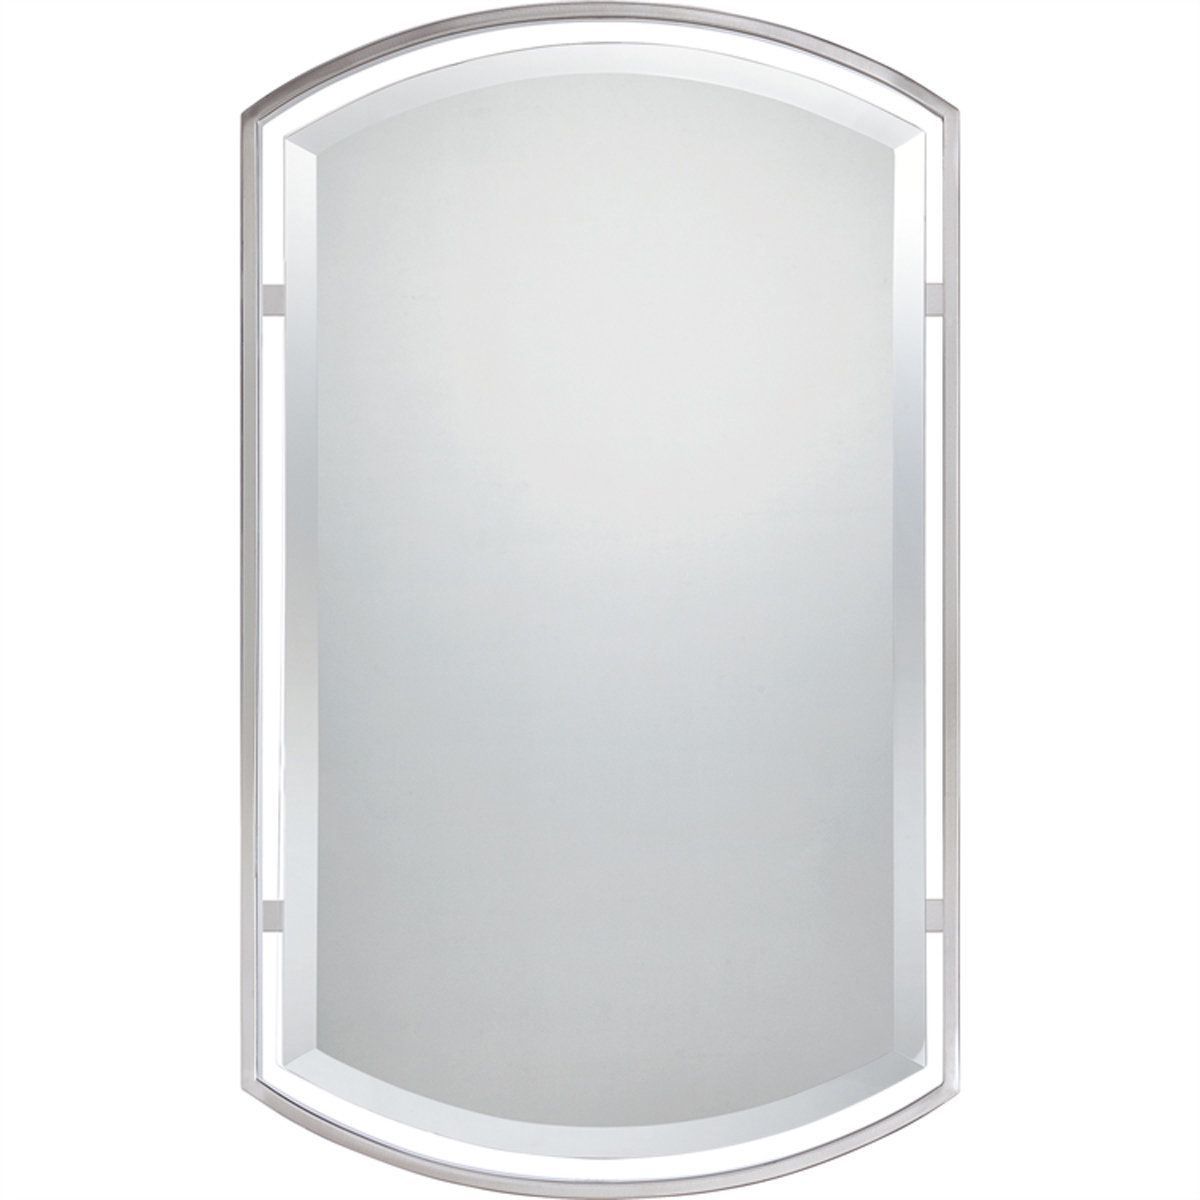 Brushed Nickel Rectangular Wall Mirrors With 2020 Floating Frame Rounded Rectangular Mirror In  (View 12 of 15)